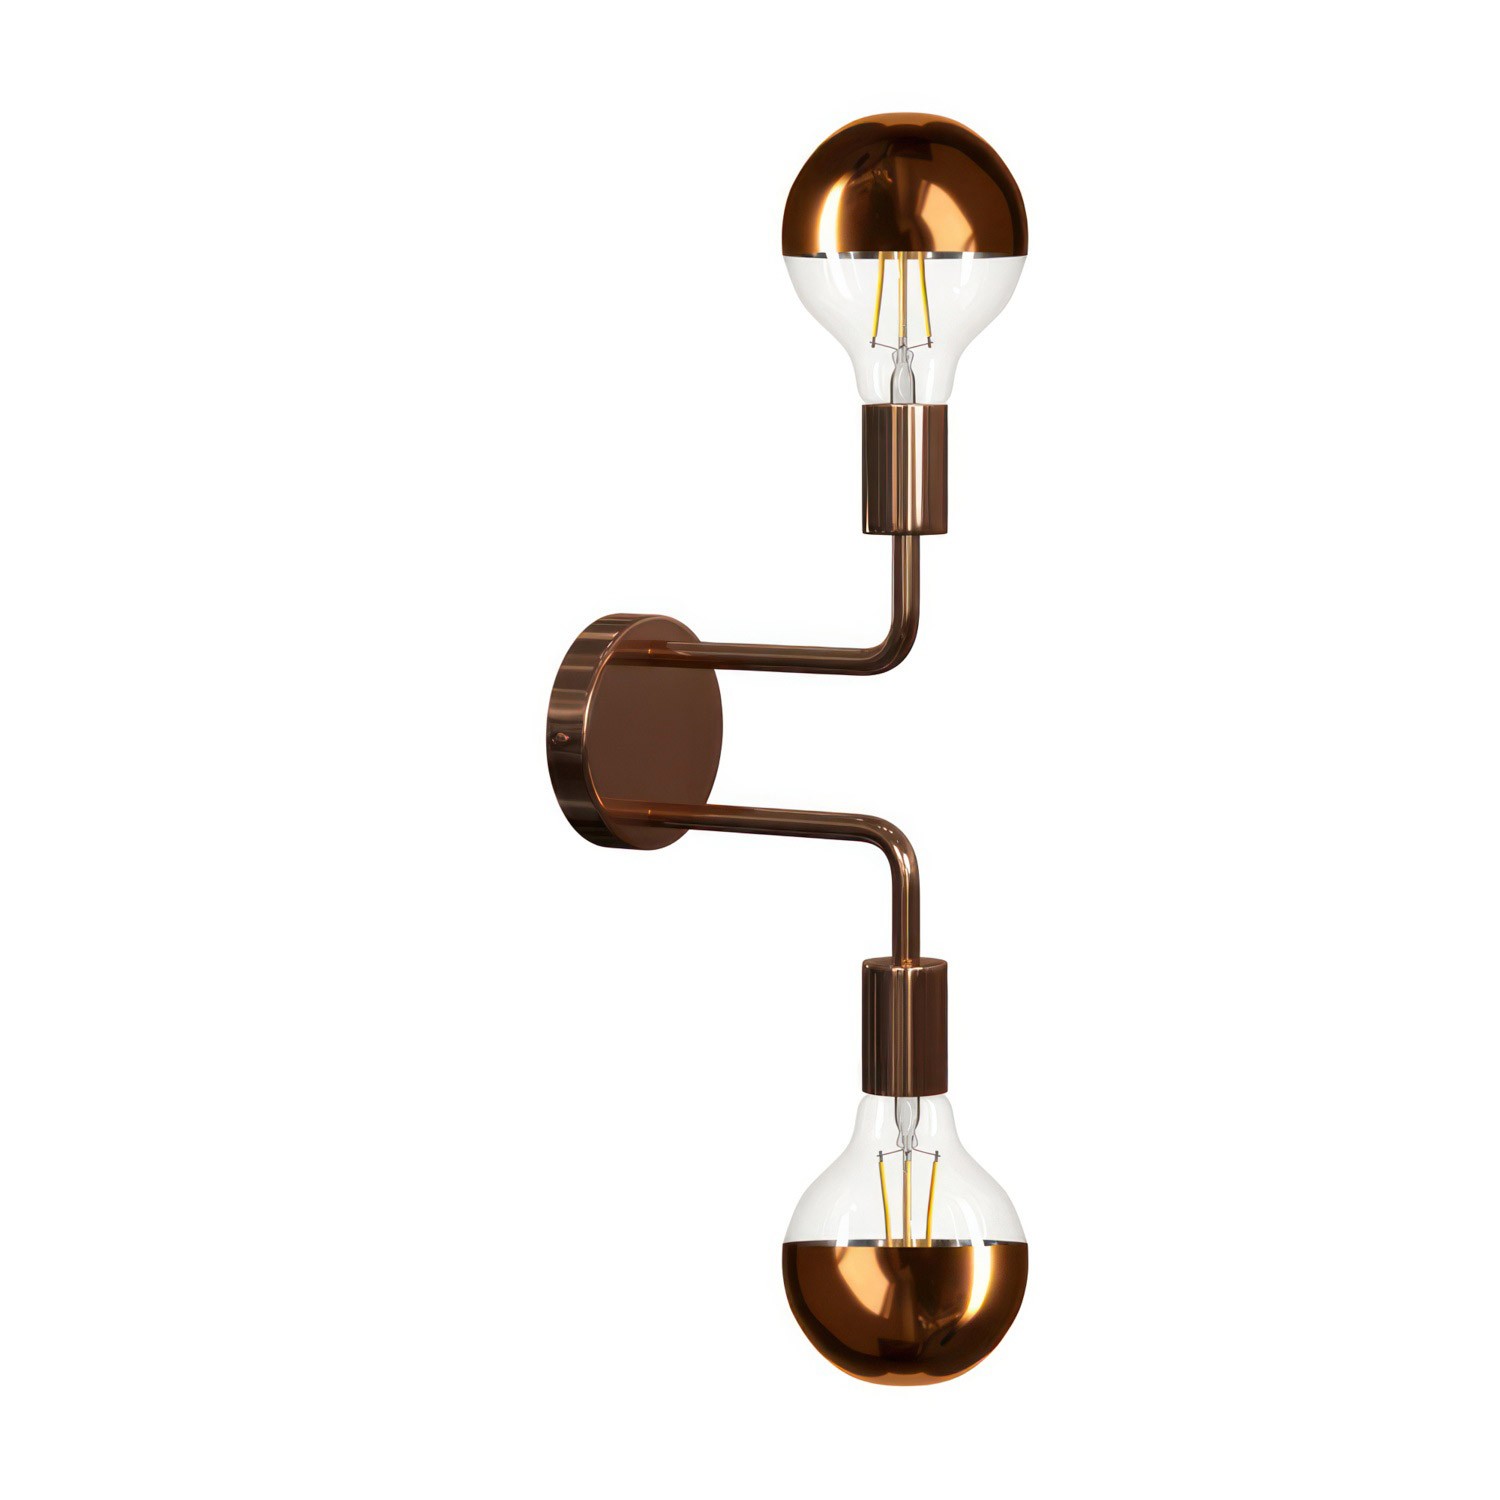 Fermaluce Metal, metal wall light with double bent extension